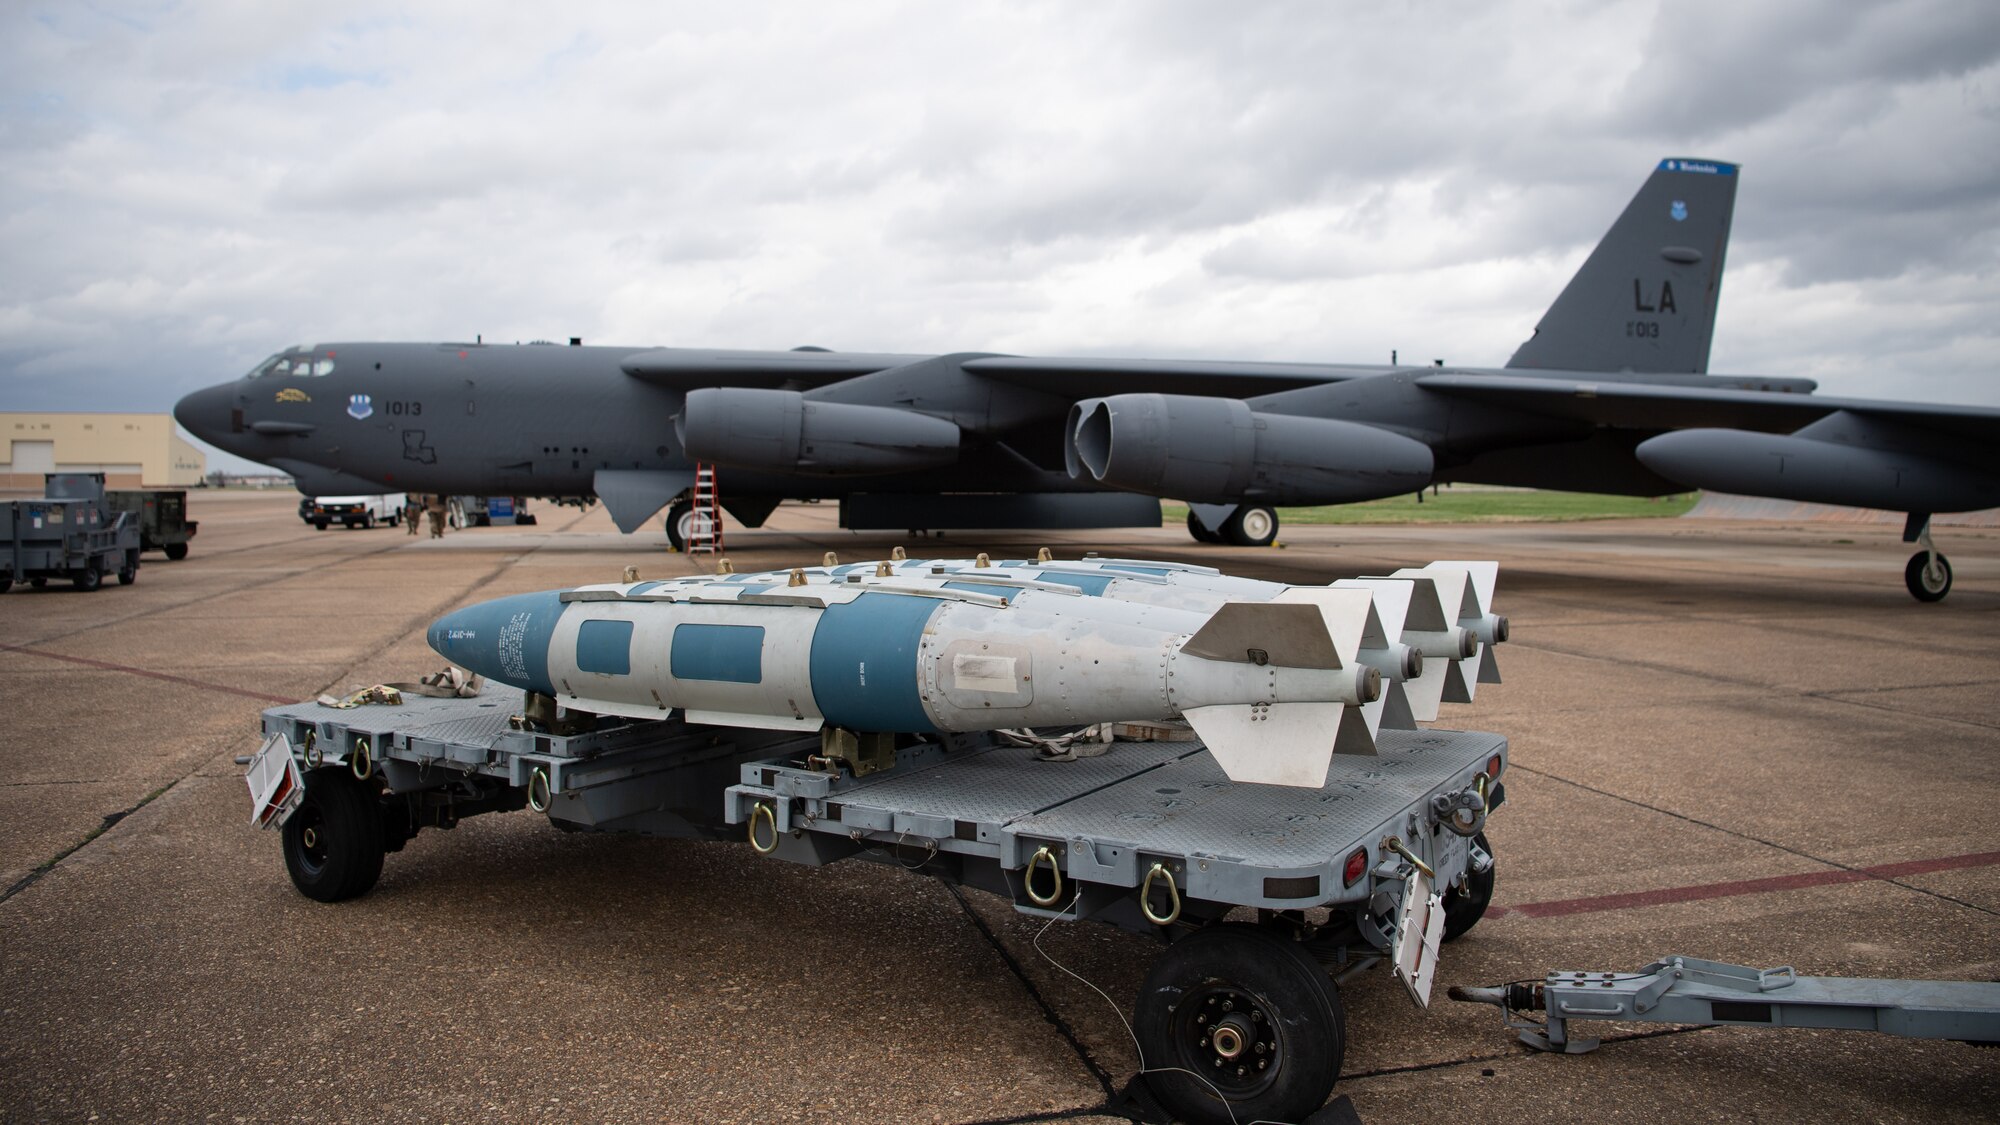 GBU-31 munitions sit in front of a B-52H Stratofortress during Combat Hammer at Barksdale Air Force, La., March 10, 2021. Airmen from the 2nd Bomb Wing flew an impressive eight for eight sortie generation and fly rate, something rarely seen across all combat platforms, not just bombers in support of the exercise. (U.S. Air Force photo by Airman 1st Class Jacob B. Wrightsman)